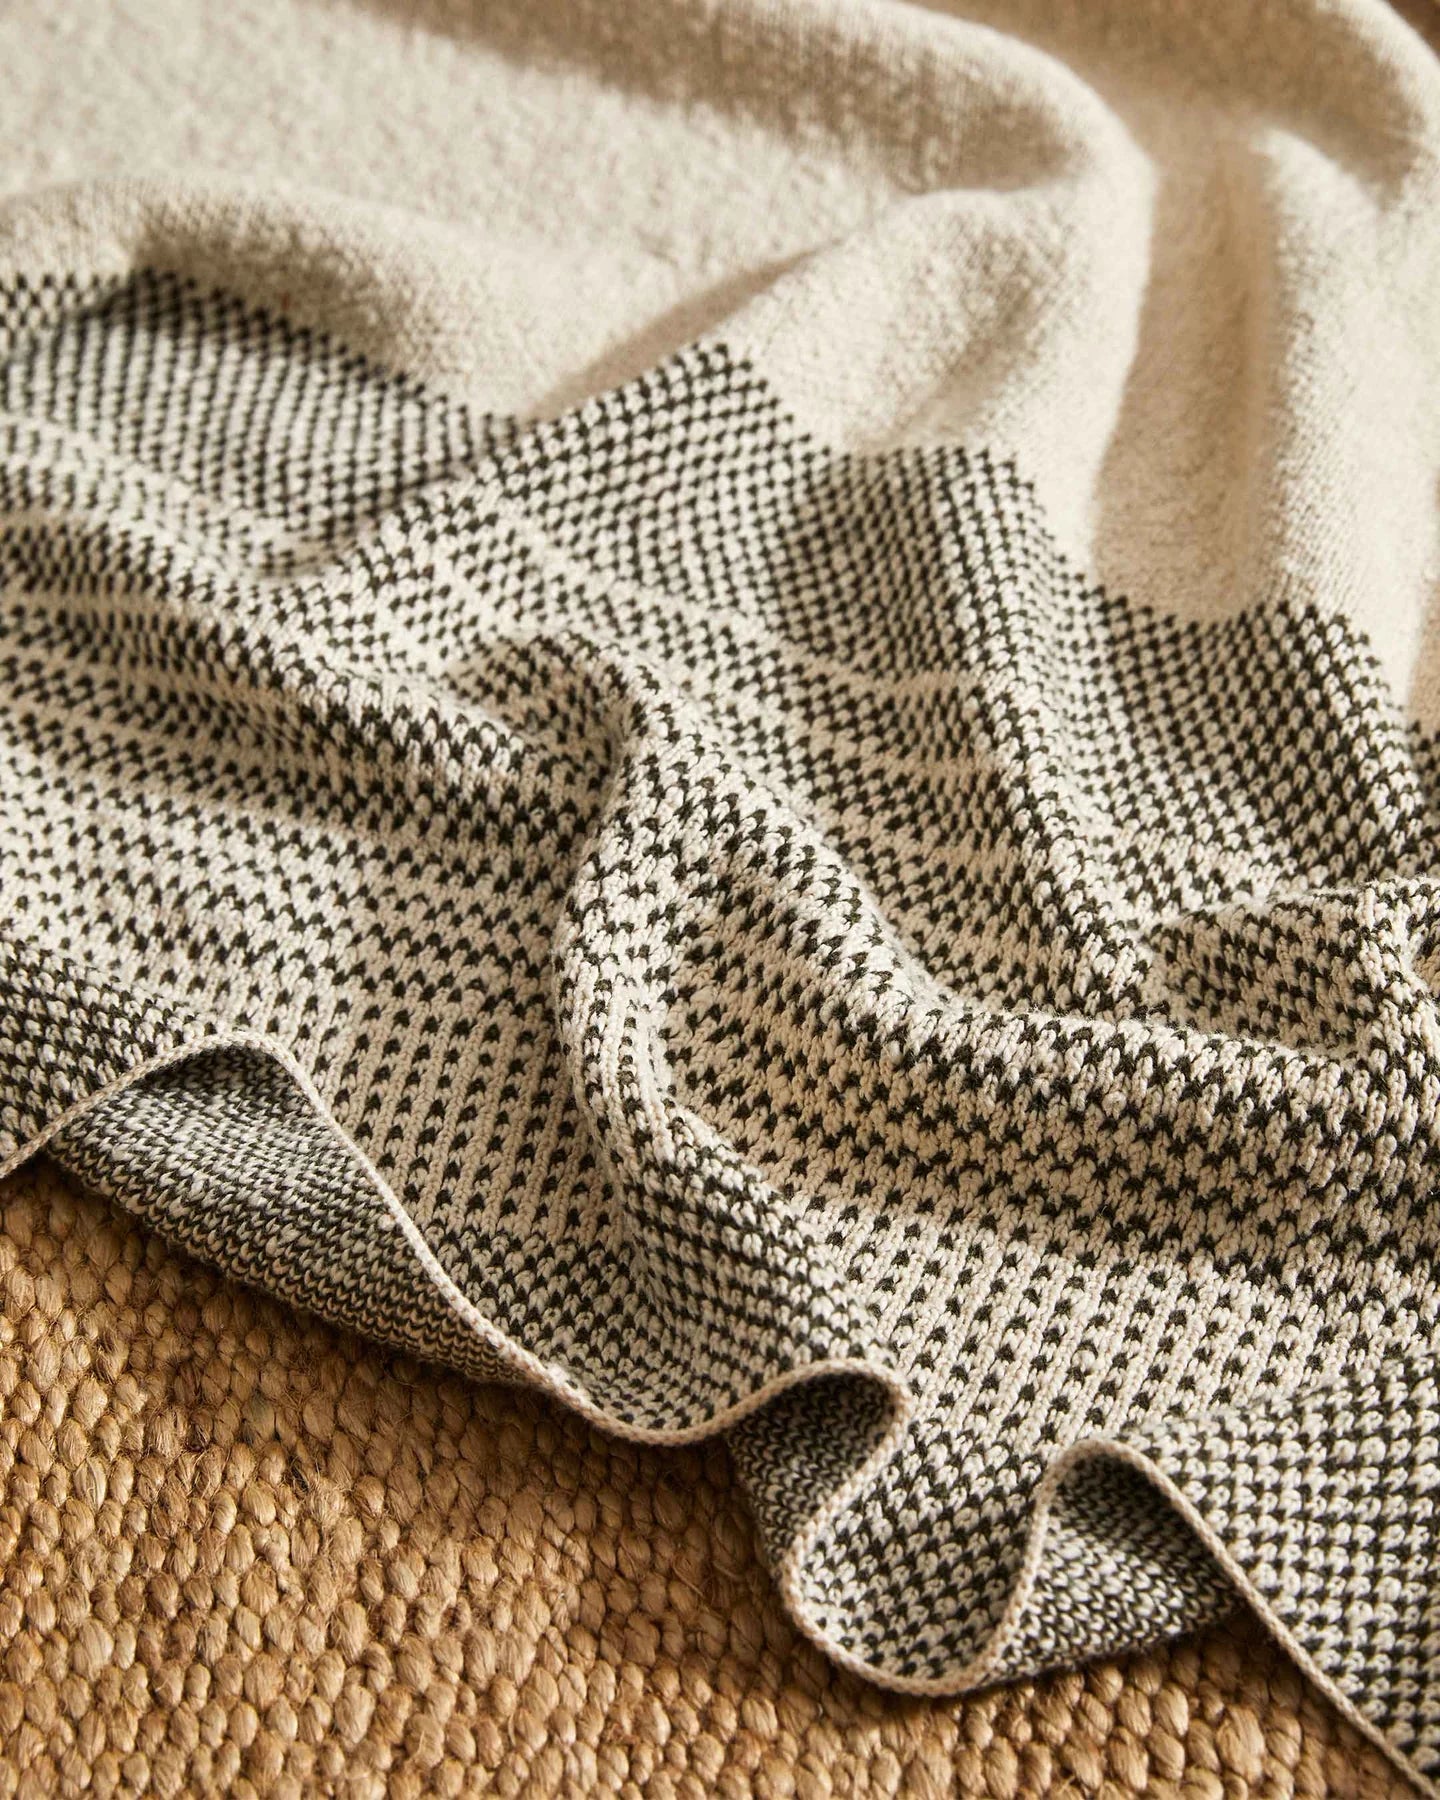 A multi-season throw — the cotton is beautifully soft, and with its generous size, Sonoma will compliment many styles, especially coastal spaces.